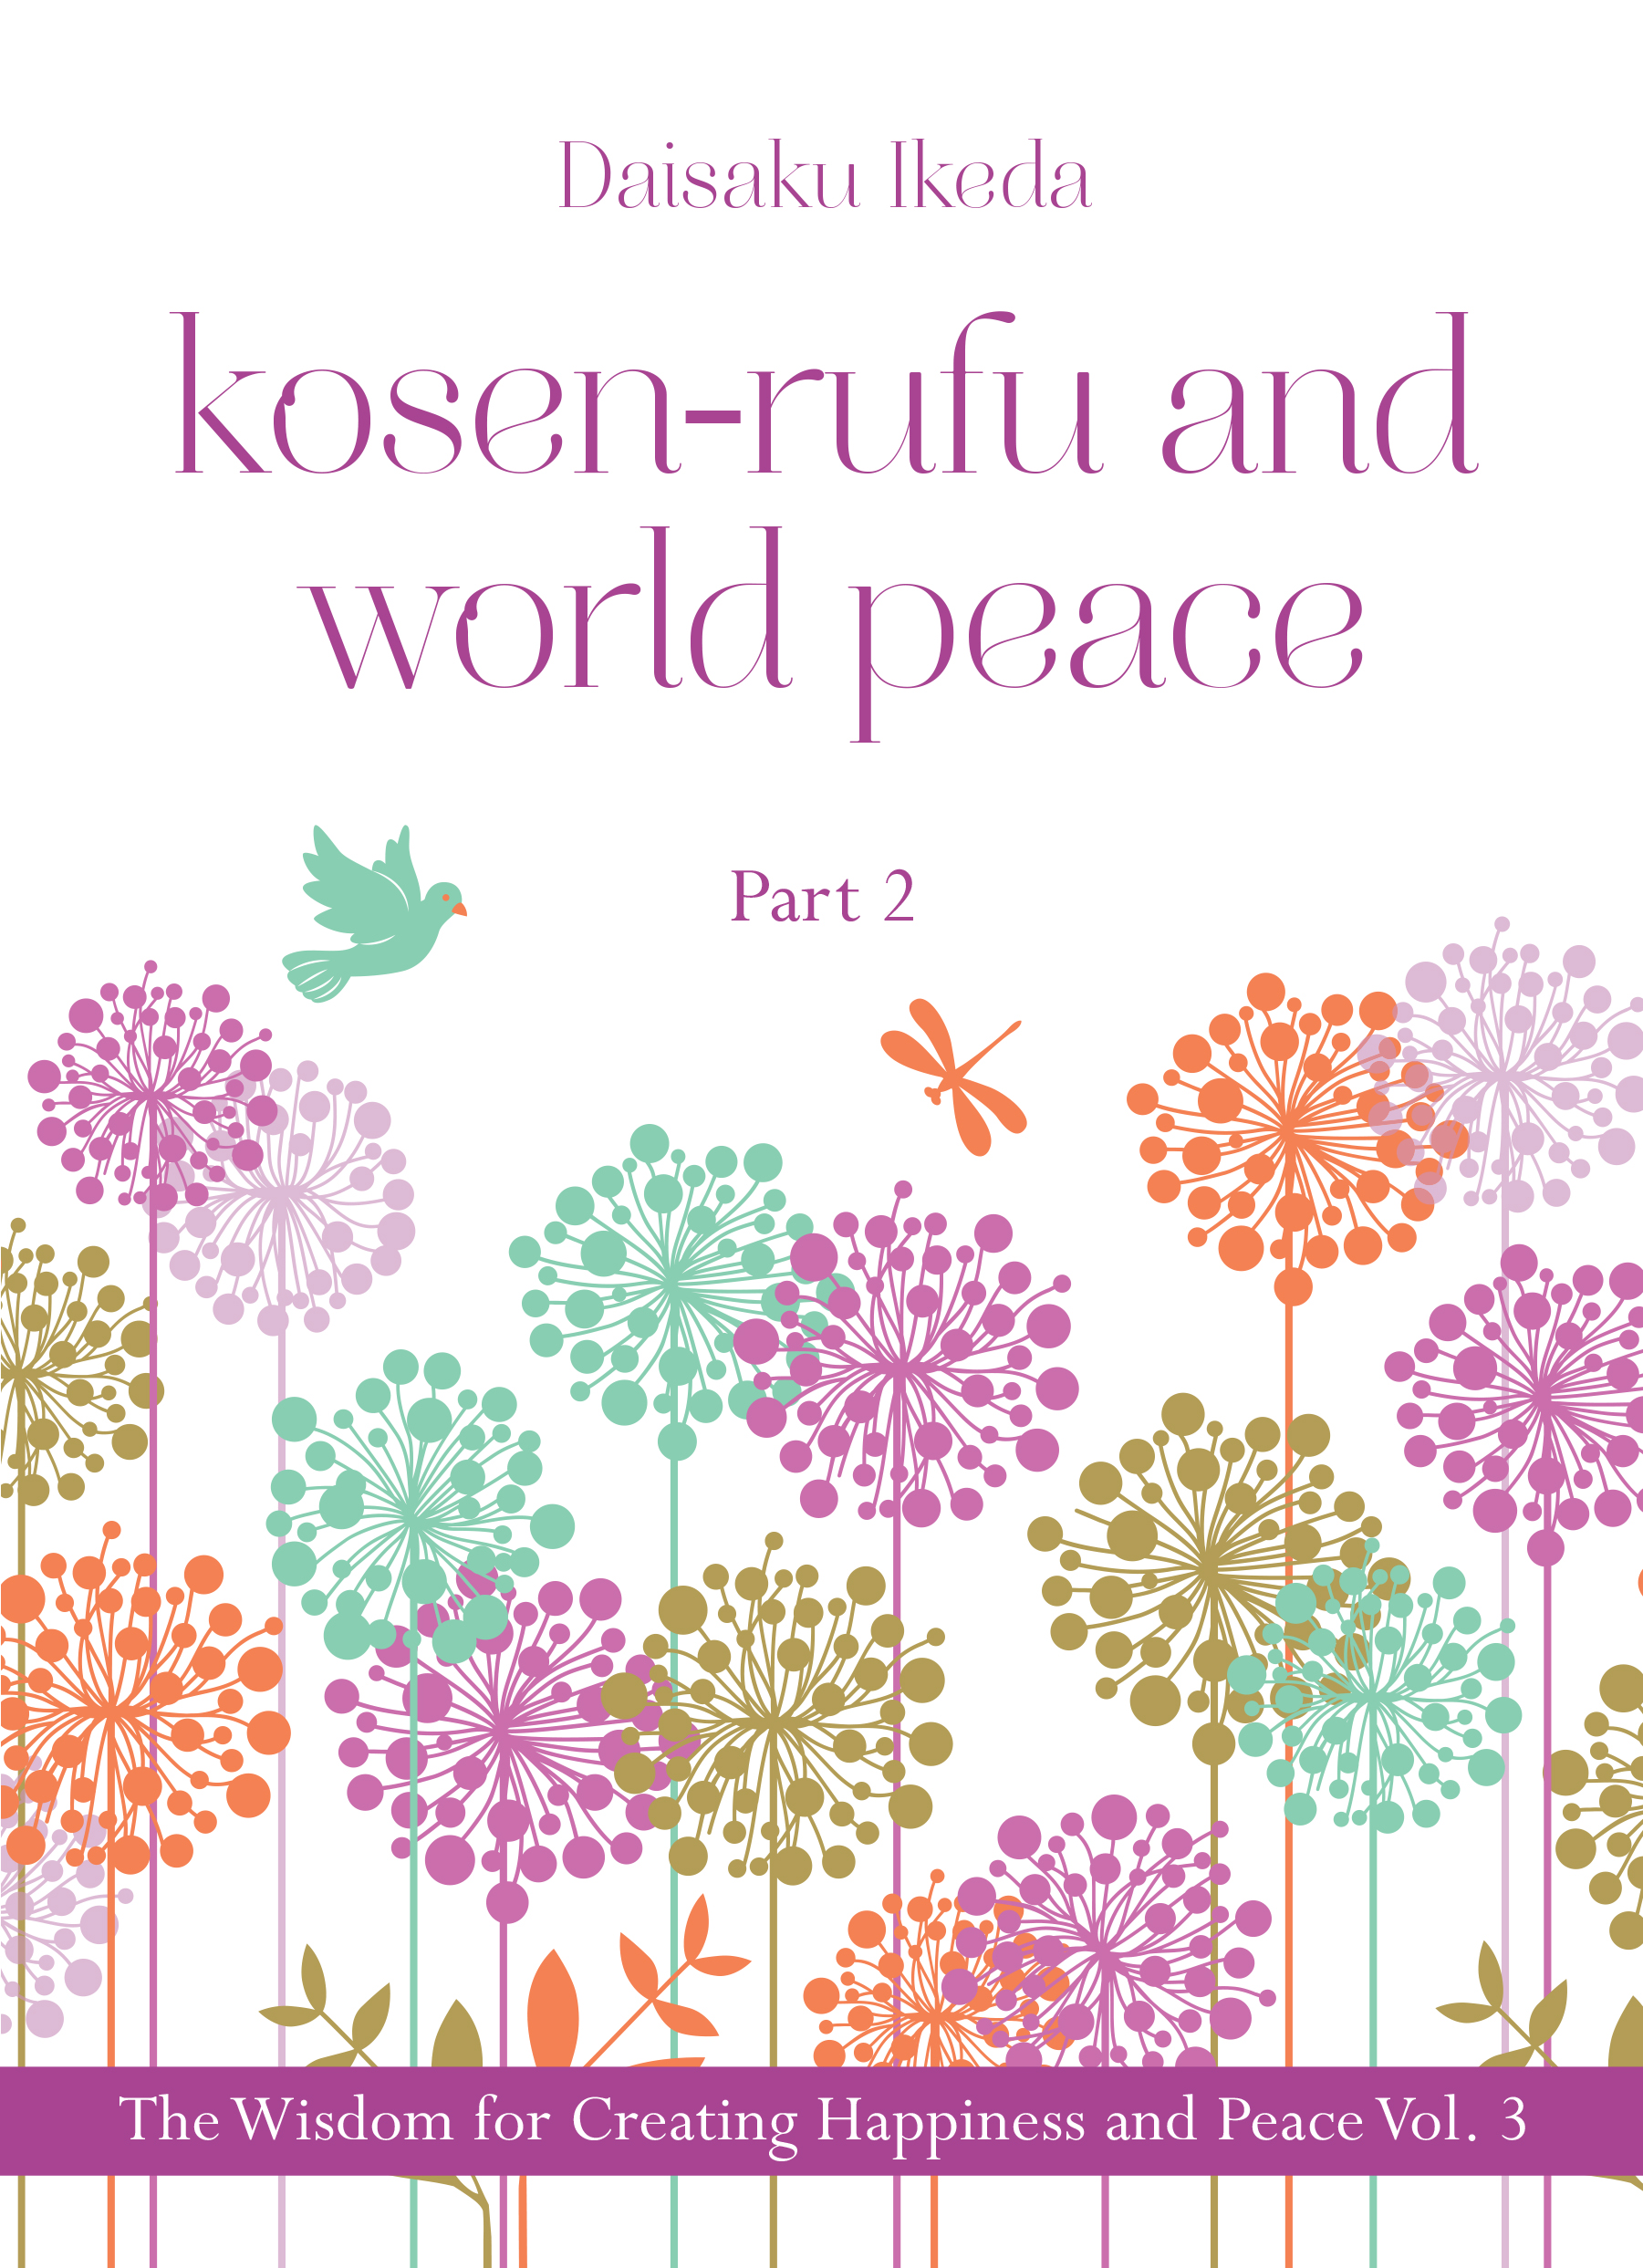 Wisdom of creating peace and happiness vol3.2